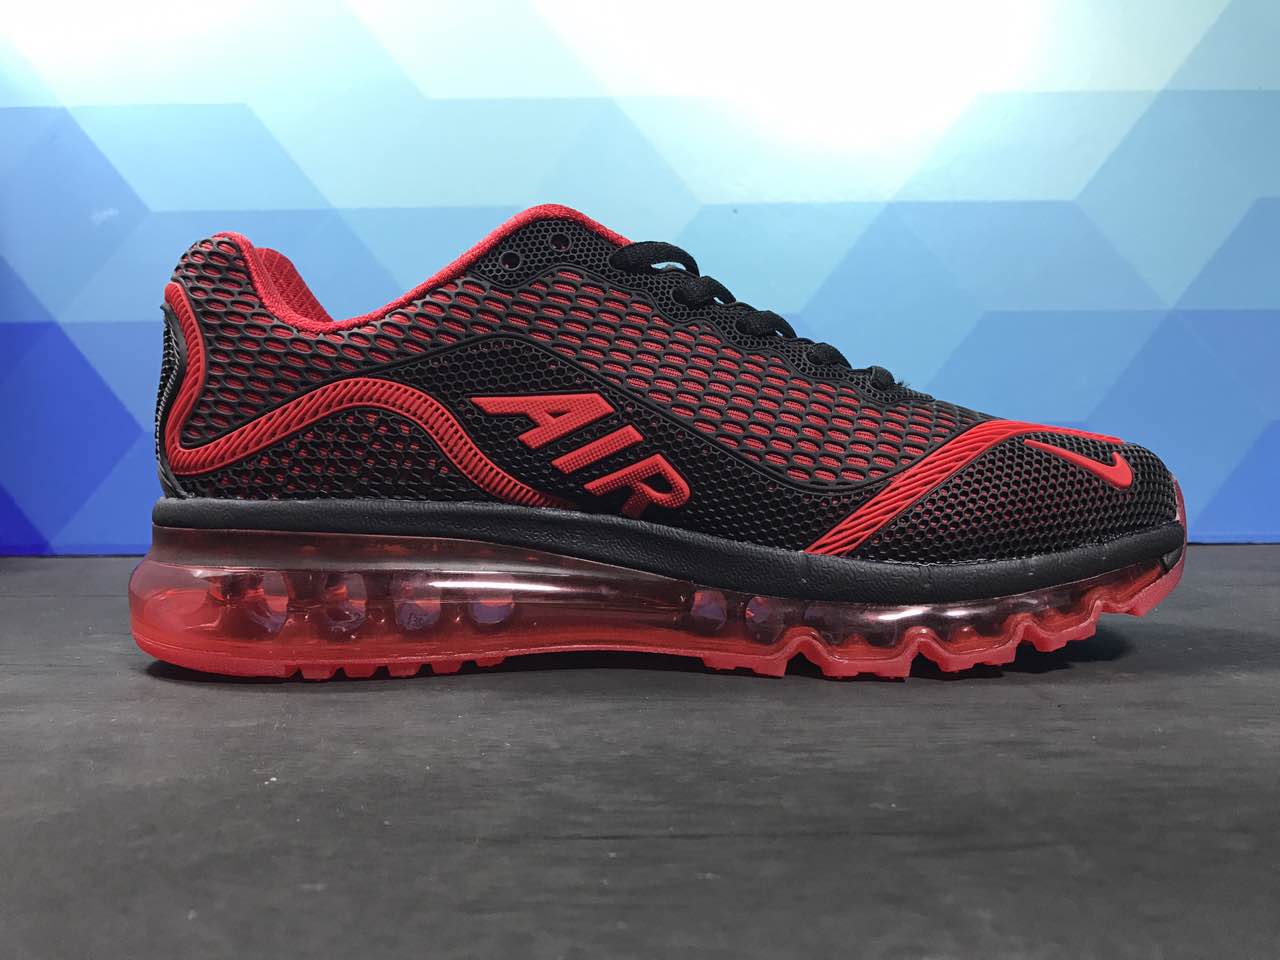 Nike Air Max 2017 III Black Red Shoes